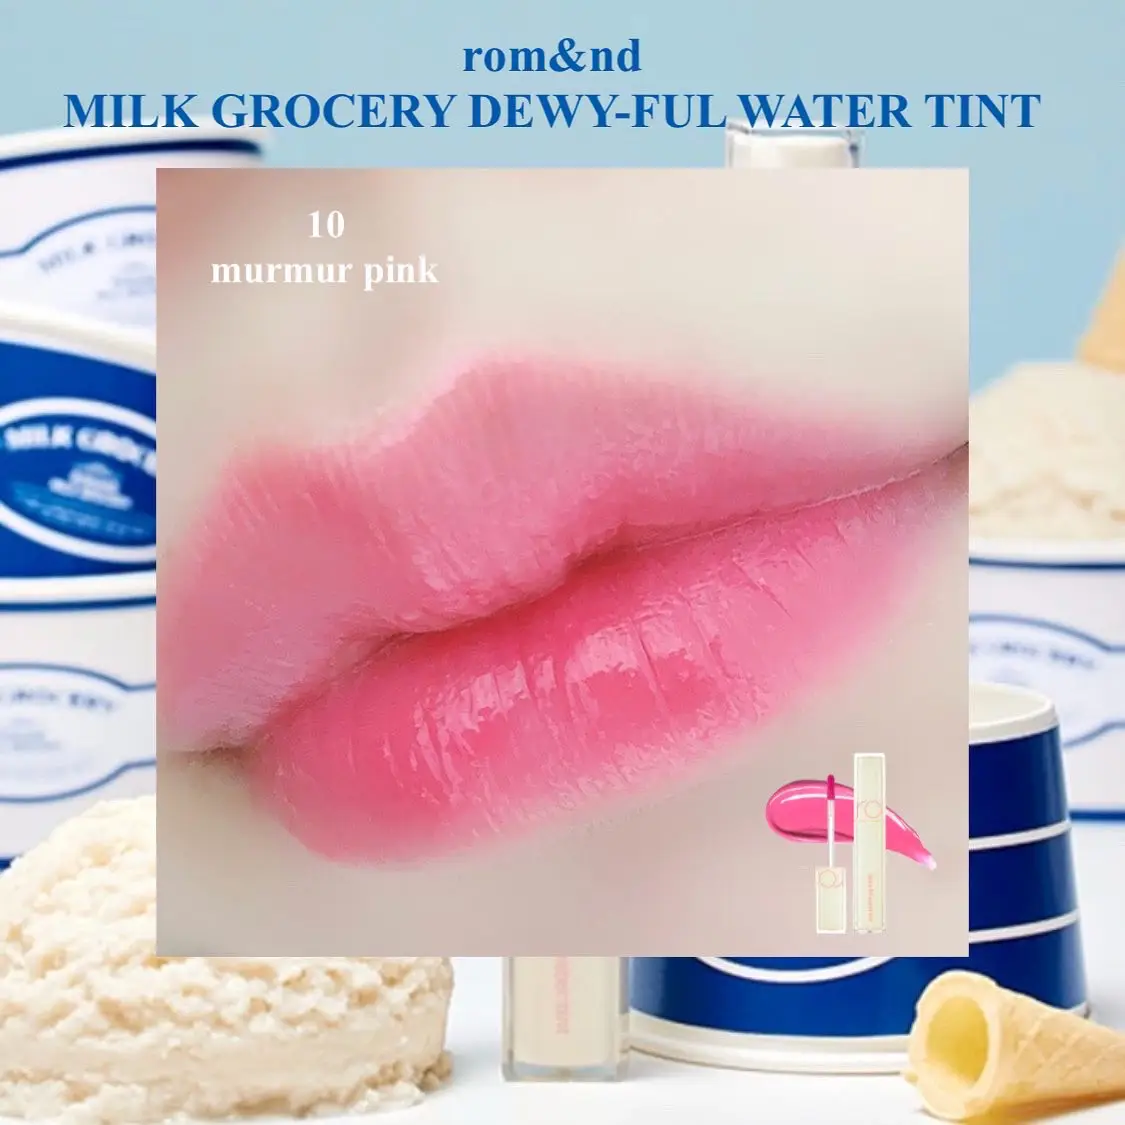 rom&nd DEWY·FUL WATER TINT Milk grocery series